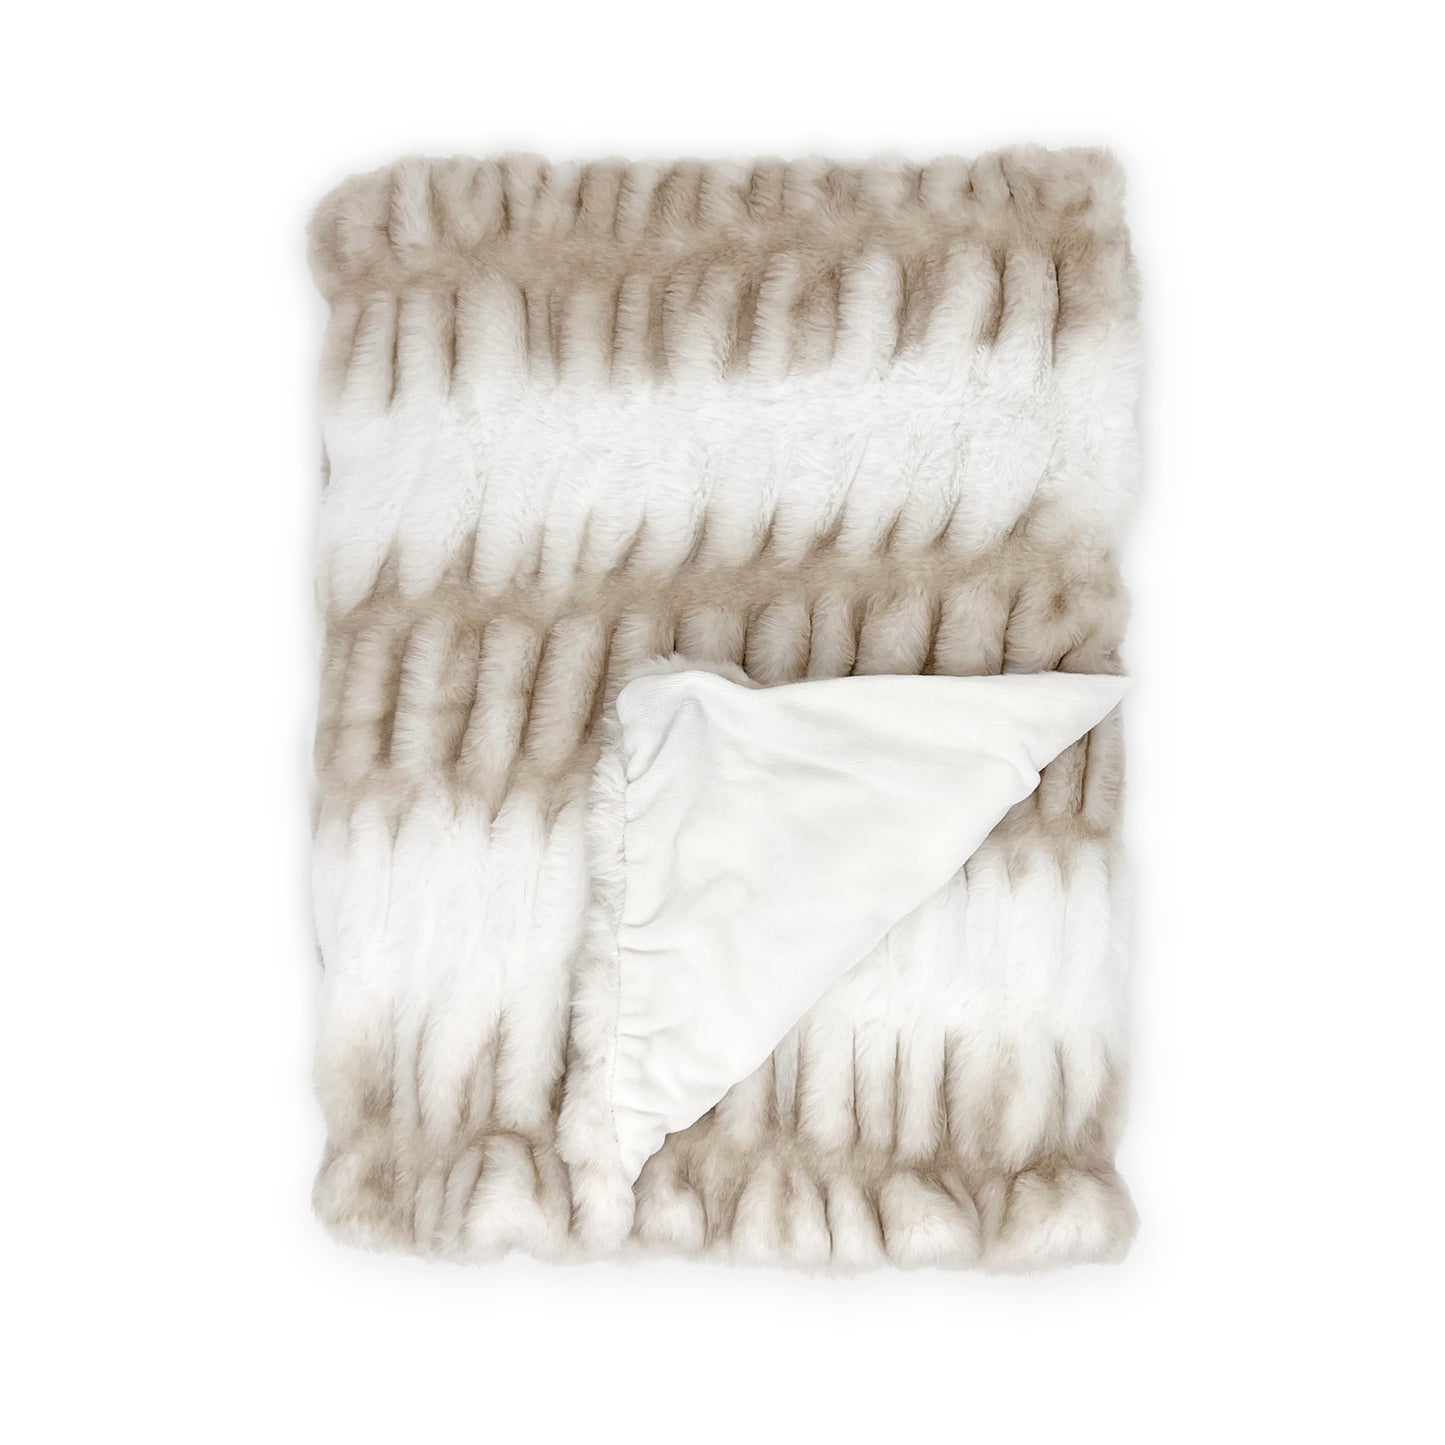  The Mood Mallow Faux Fur Throw, 50x60 in., Brown/White